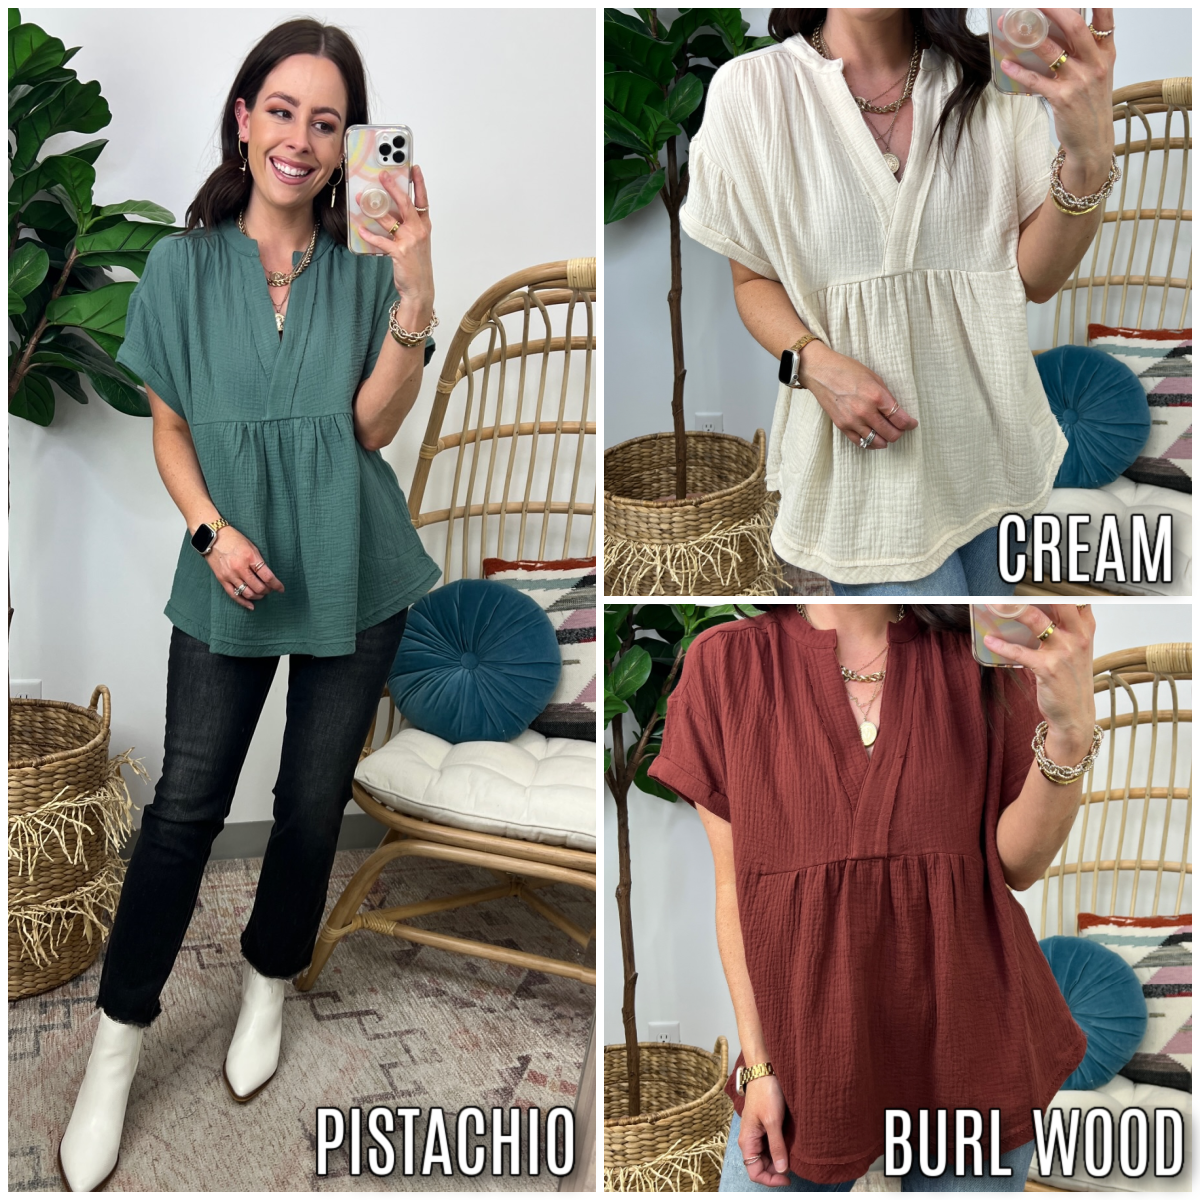  Kaelin V-Neck Flowy Top - FINAL SALE - Madison and Mallory